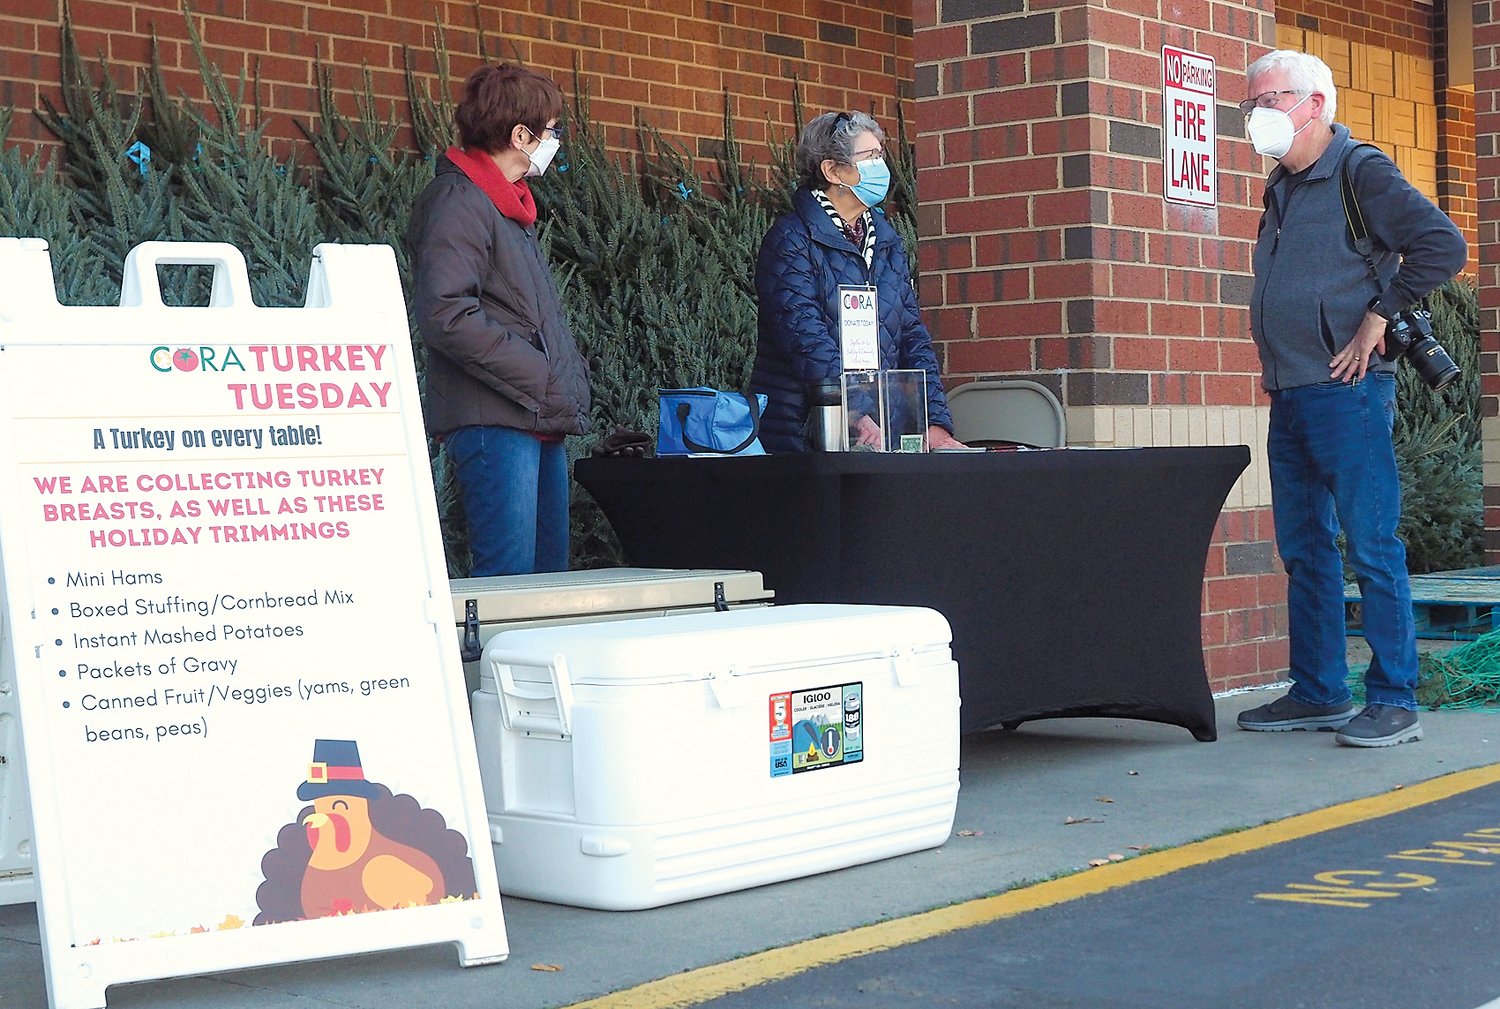 Volunteers working to collect food donations for CORA's 'Turkey Tuesday' food drive last week.